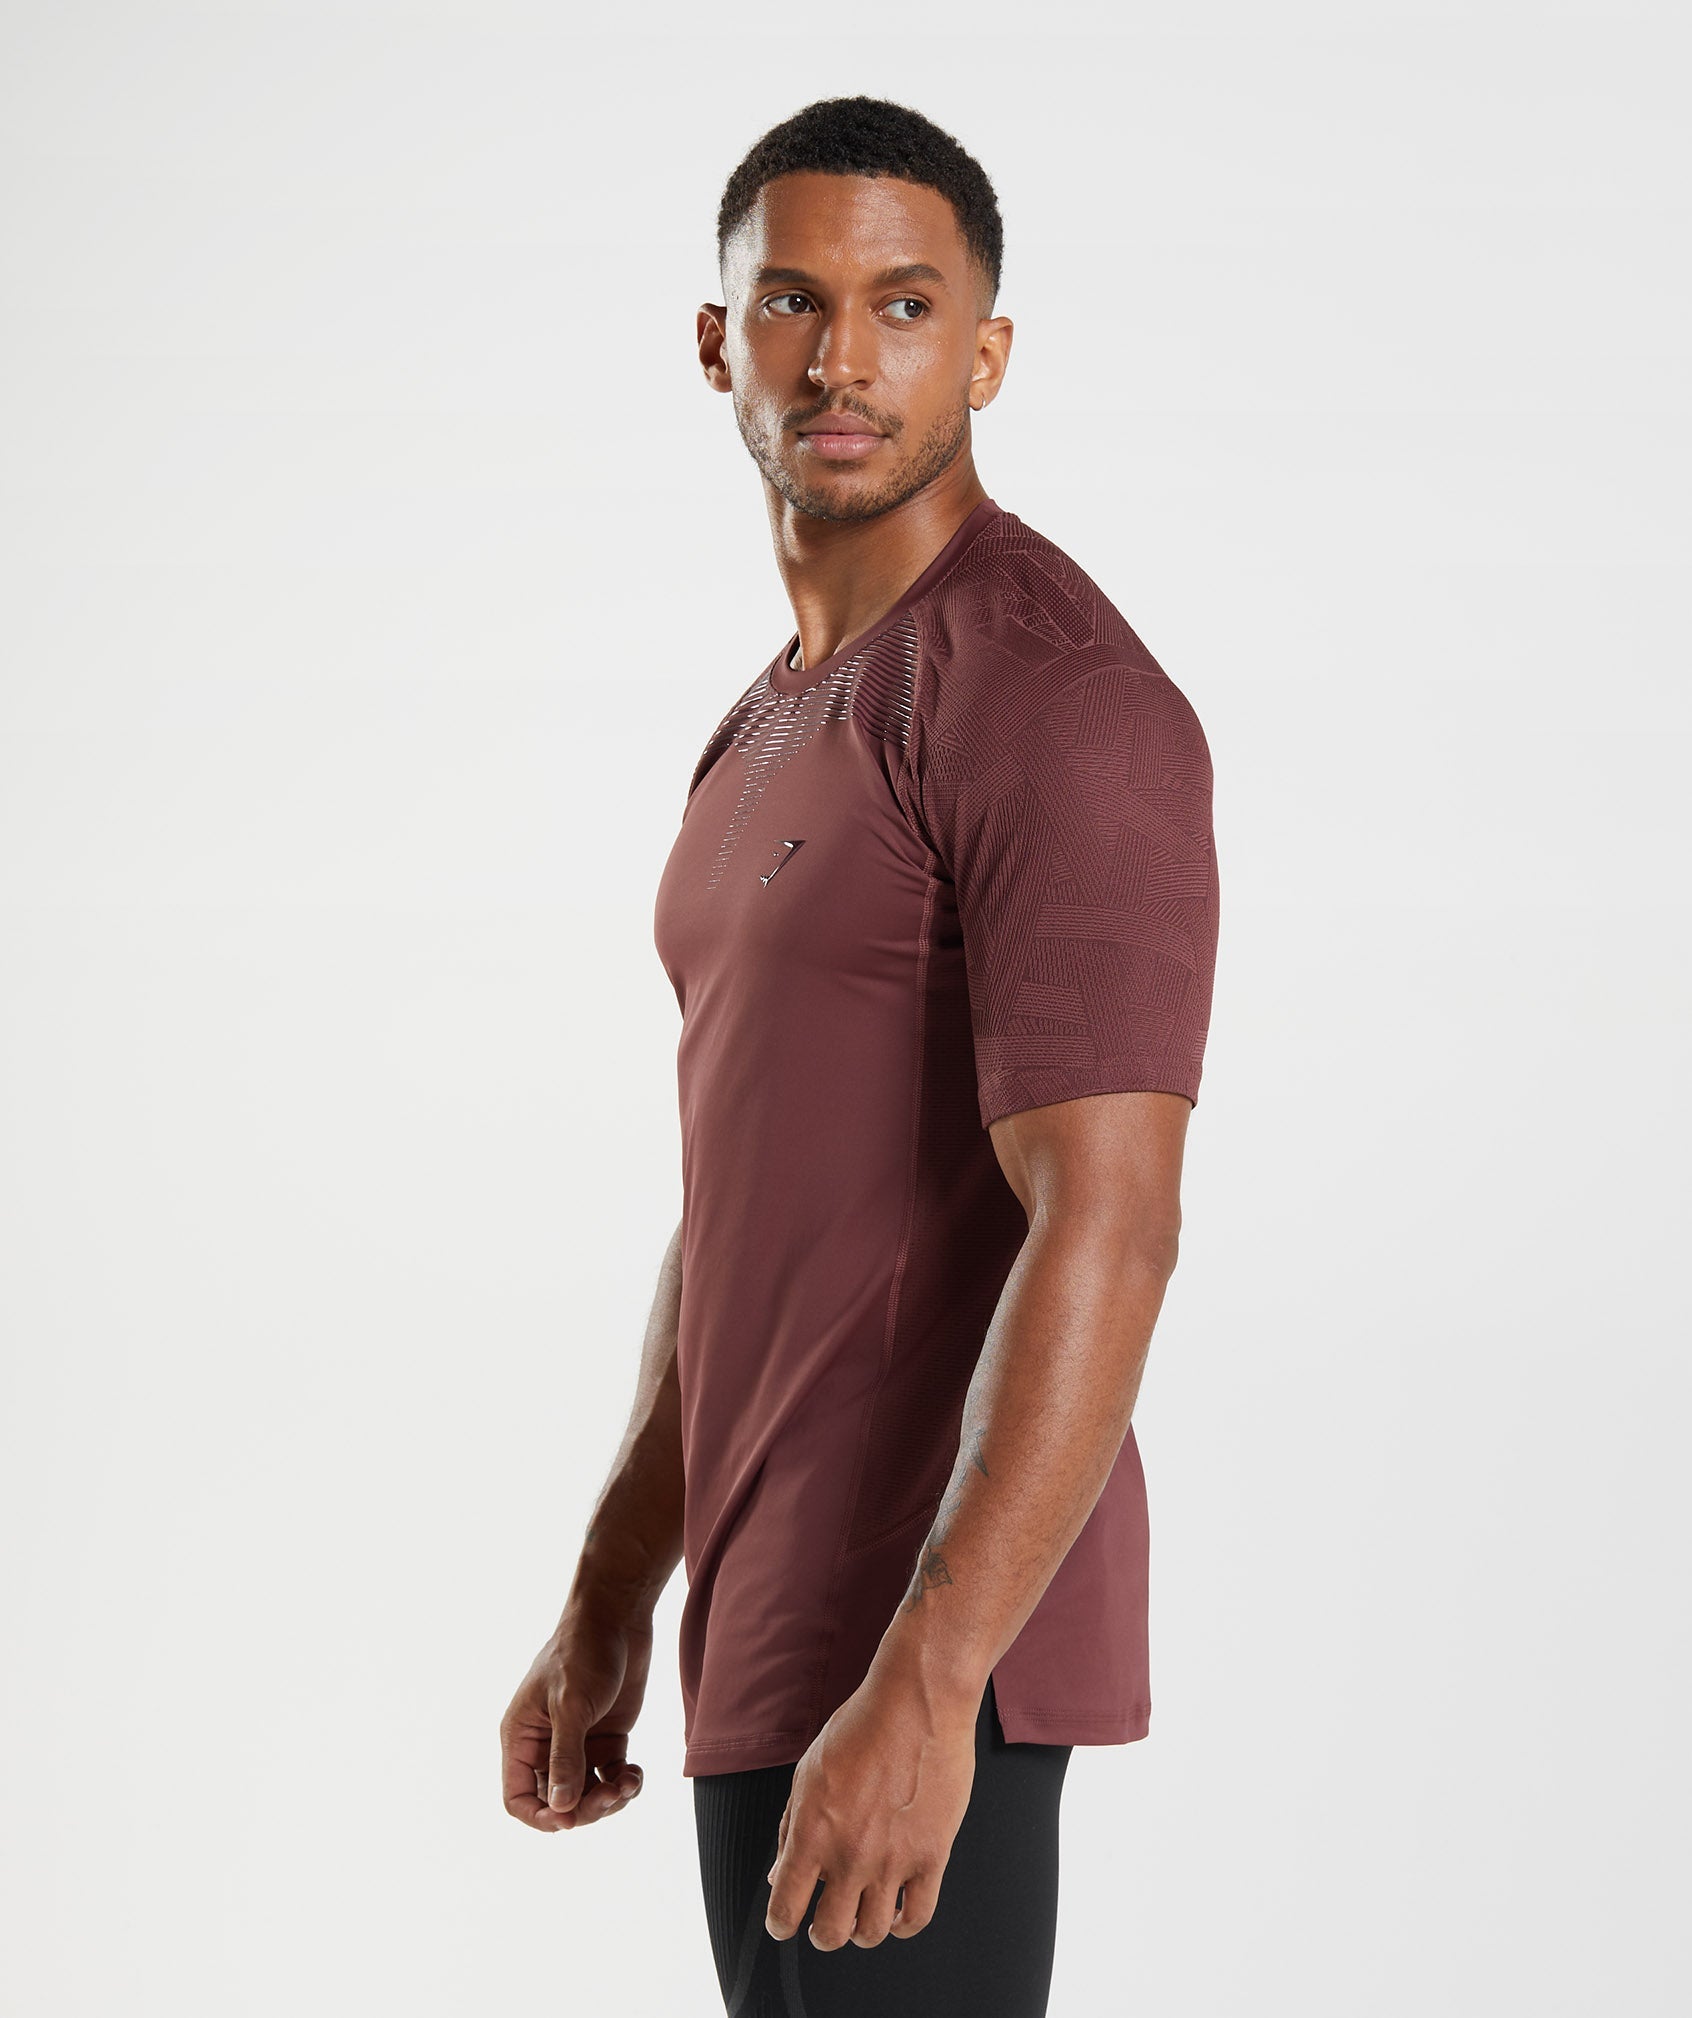 Form T-Shirt in Cherry Brown - view 3